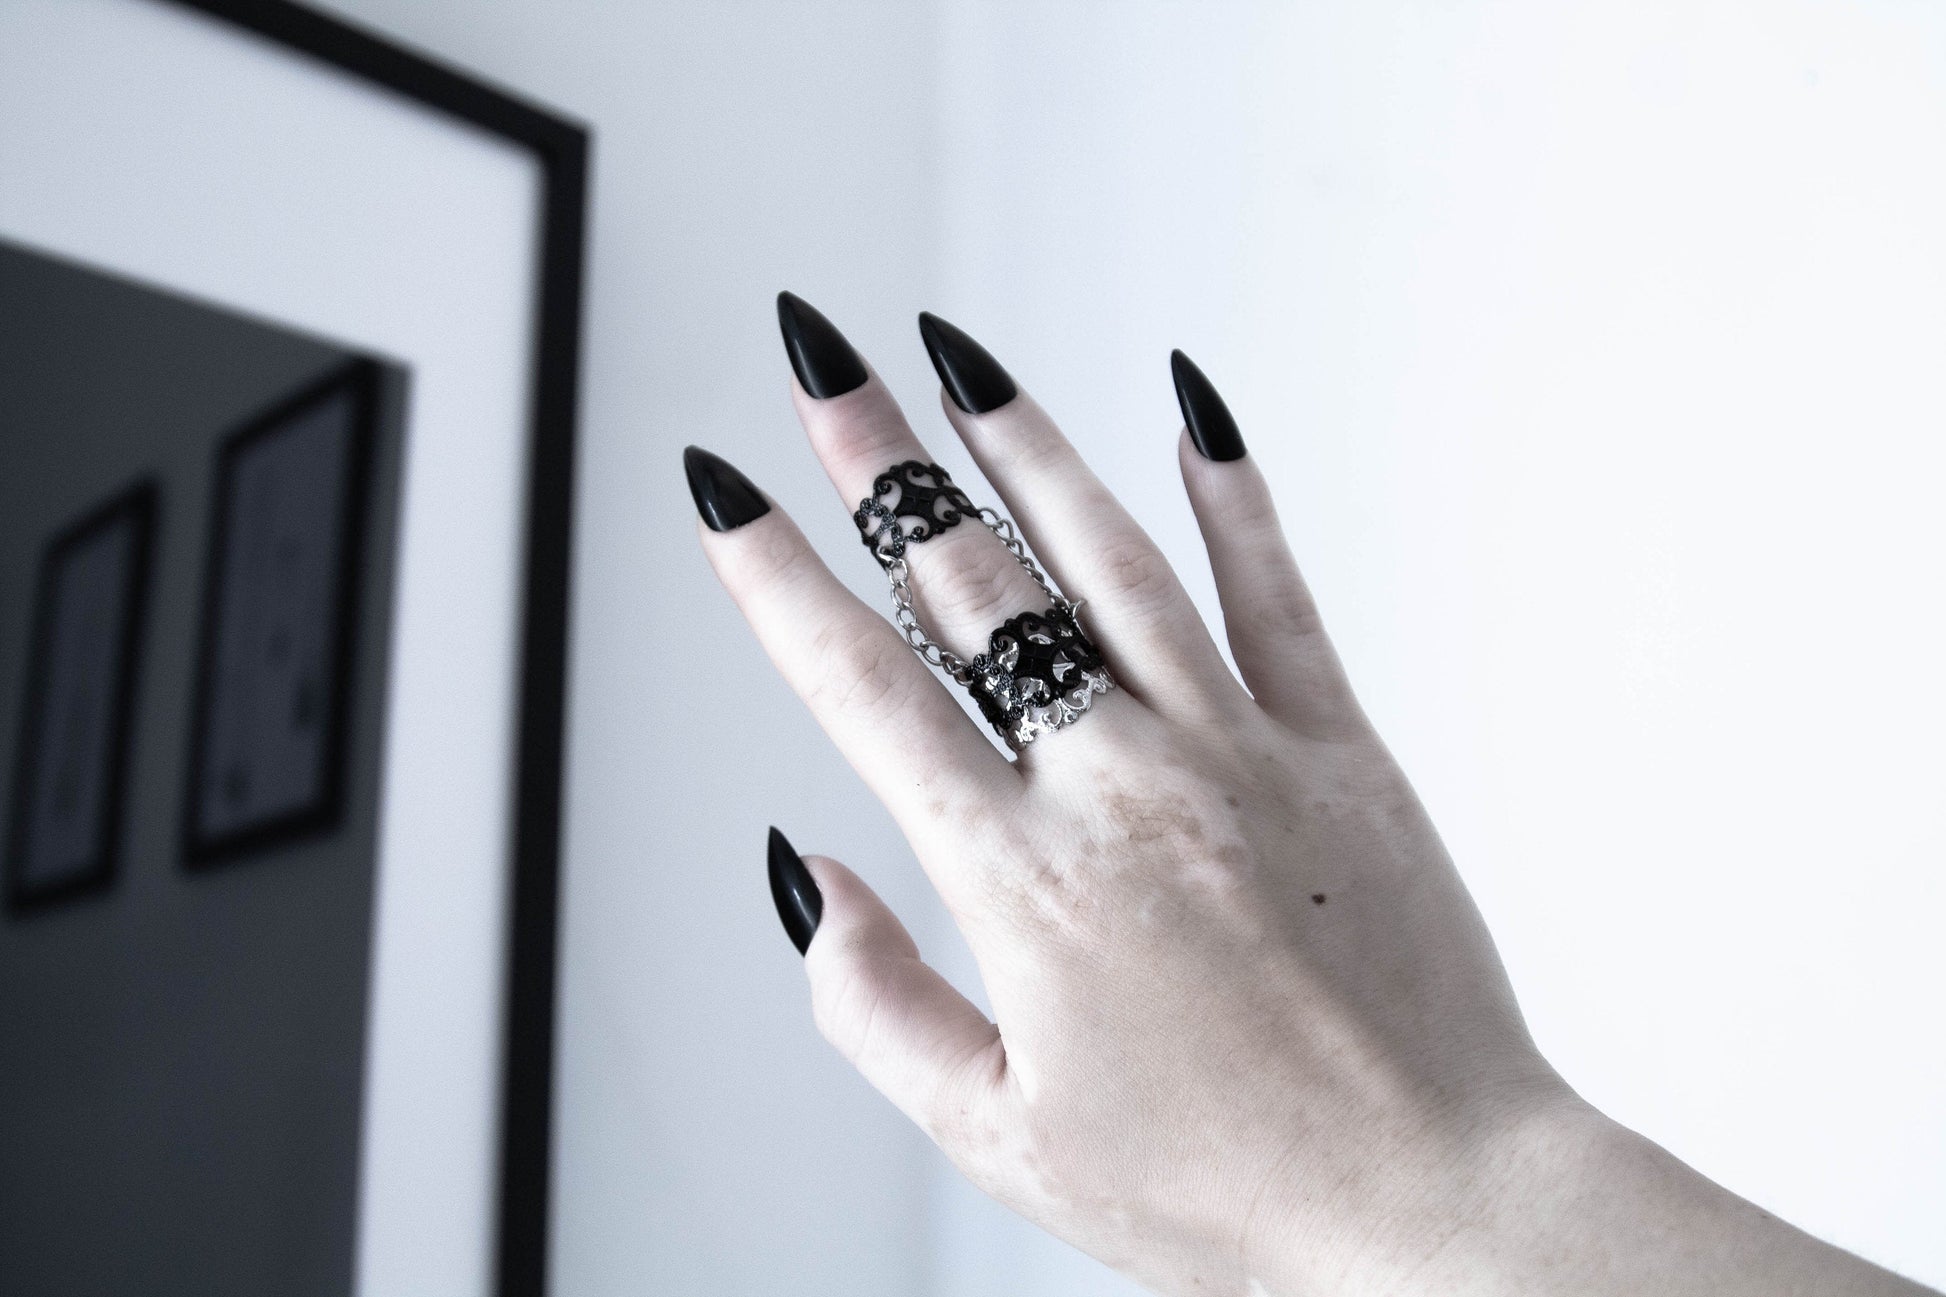  A hand with long black stiletto nails wears an intricately designed Myril Jewels double ring, connected by a delicate chain, embodies neo-gothic finesse. Perfect for witchcore fashion, this piece is an edgy accessory for gothic-chic style, making it an ideal gift for the bold goth girlfriend or as a standout festival jewel.